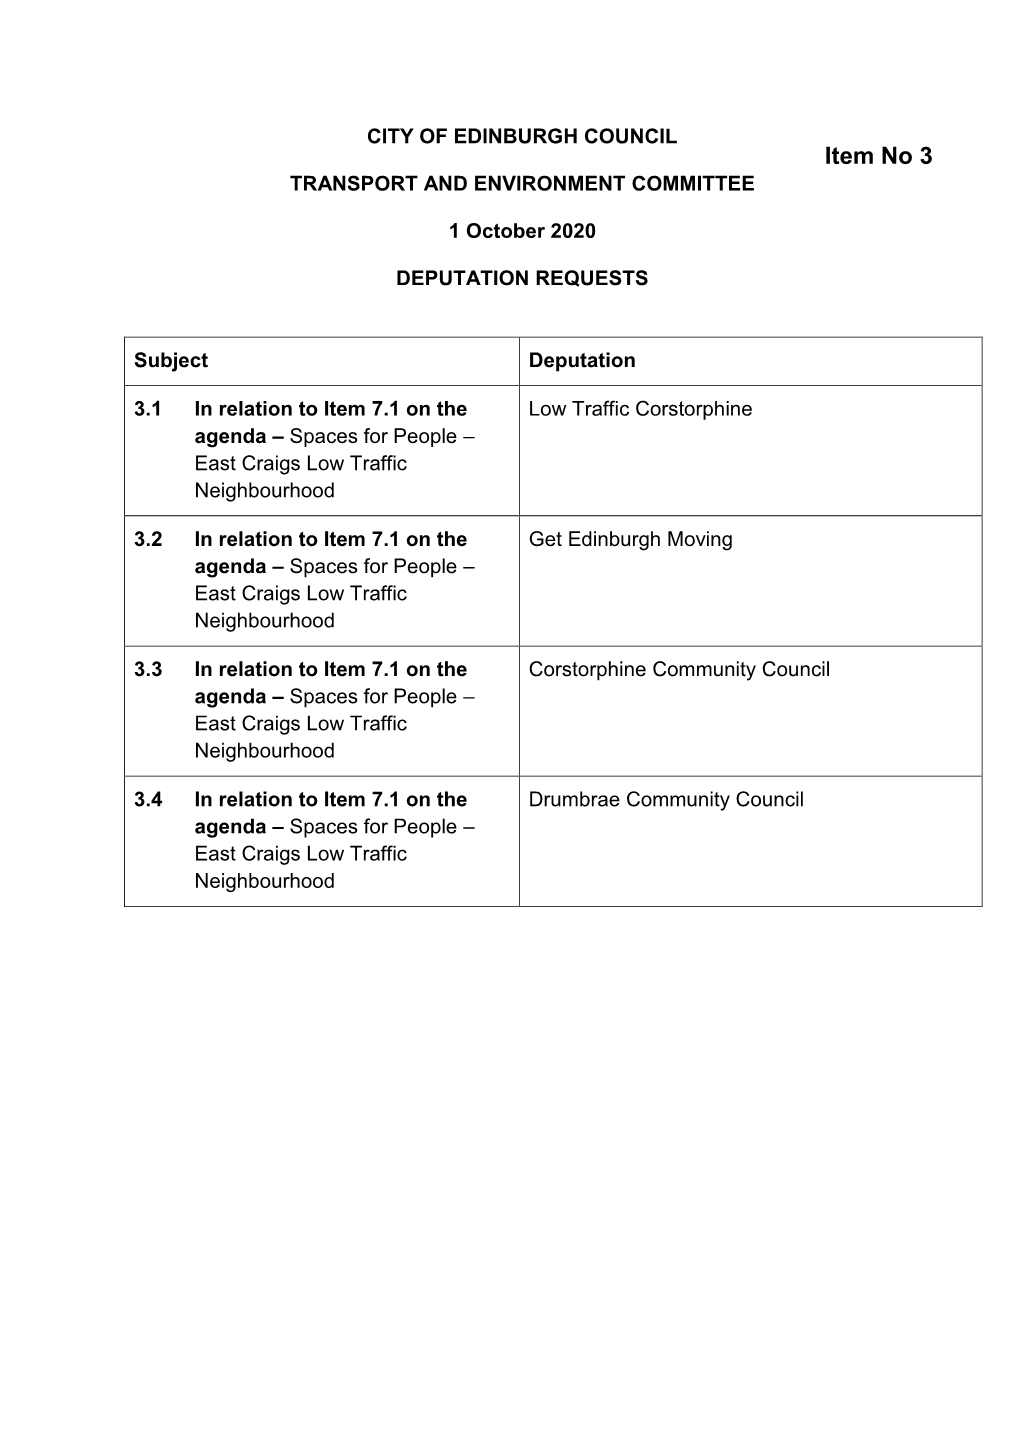 Item No 3 TRANSPORT and ENVIRONMENT COMMITTEE